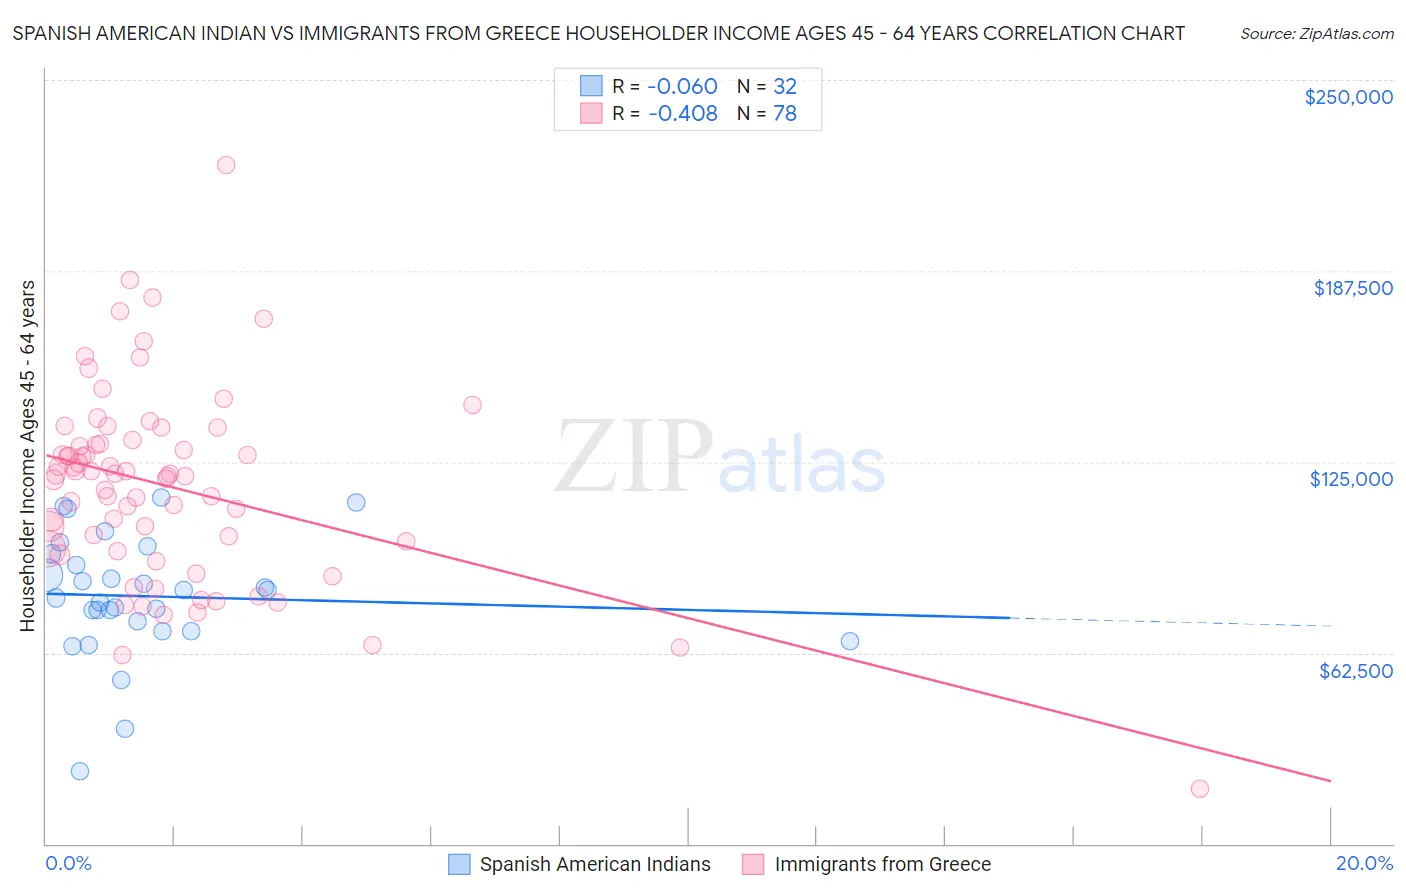 Spanish American Indian vs Immigrants from Greece Householder Income Ages 45 - 64 years